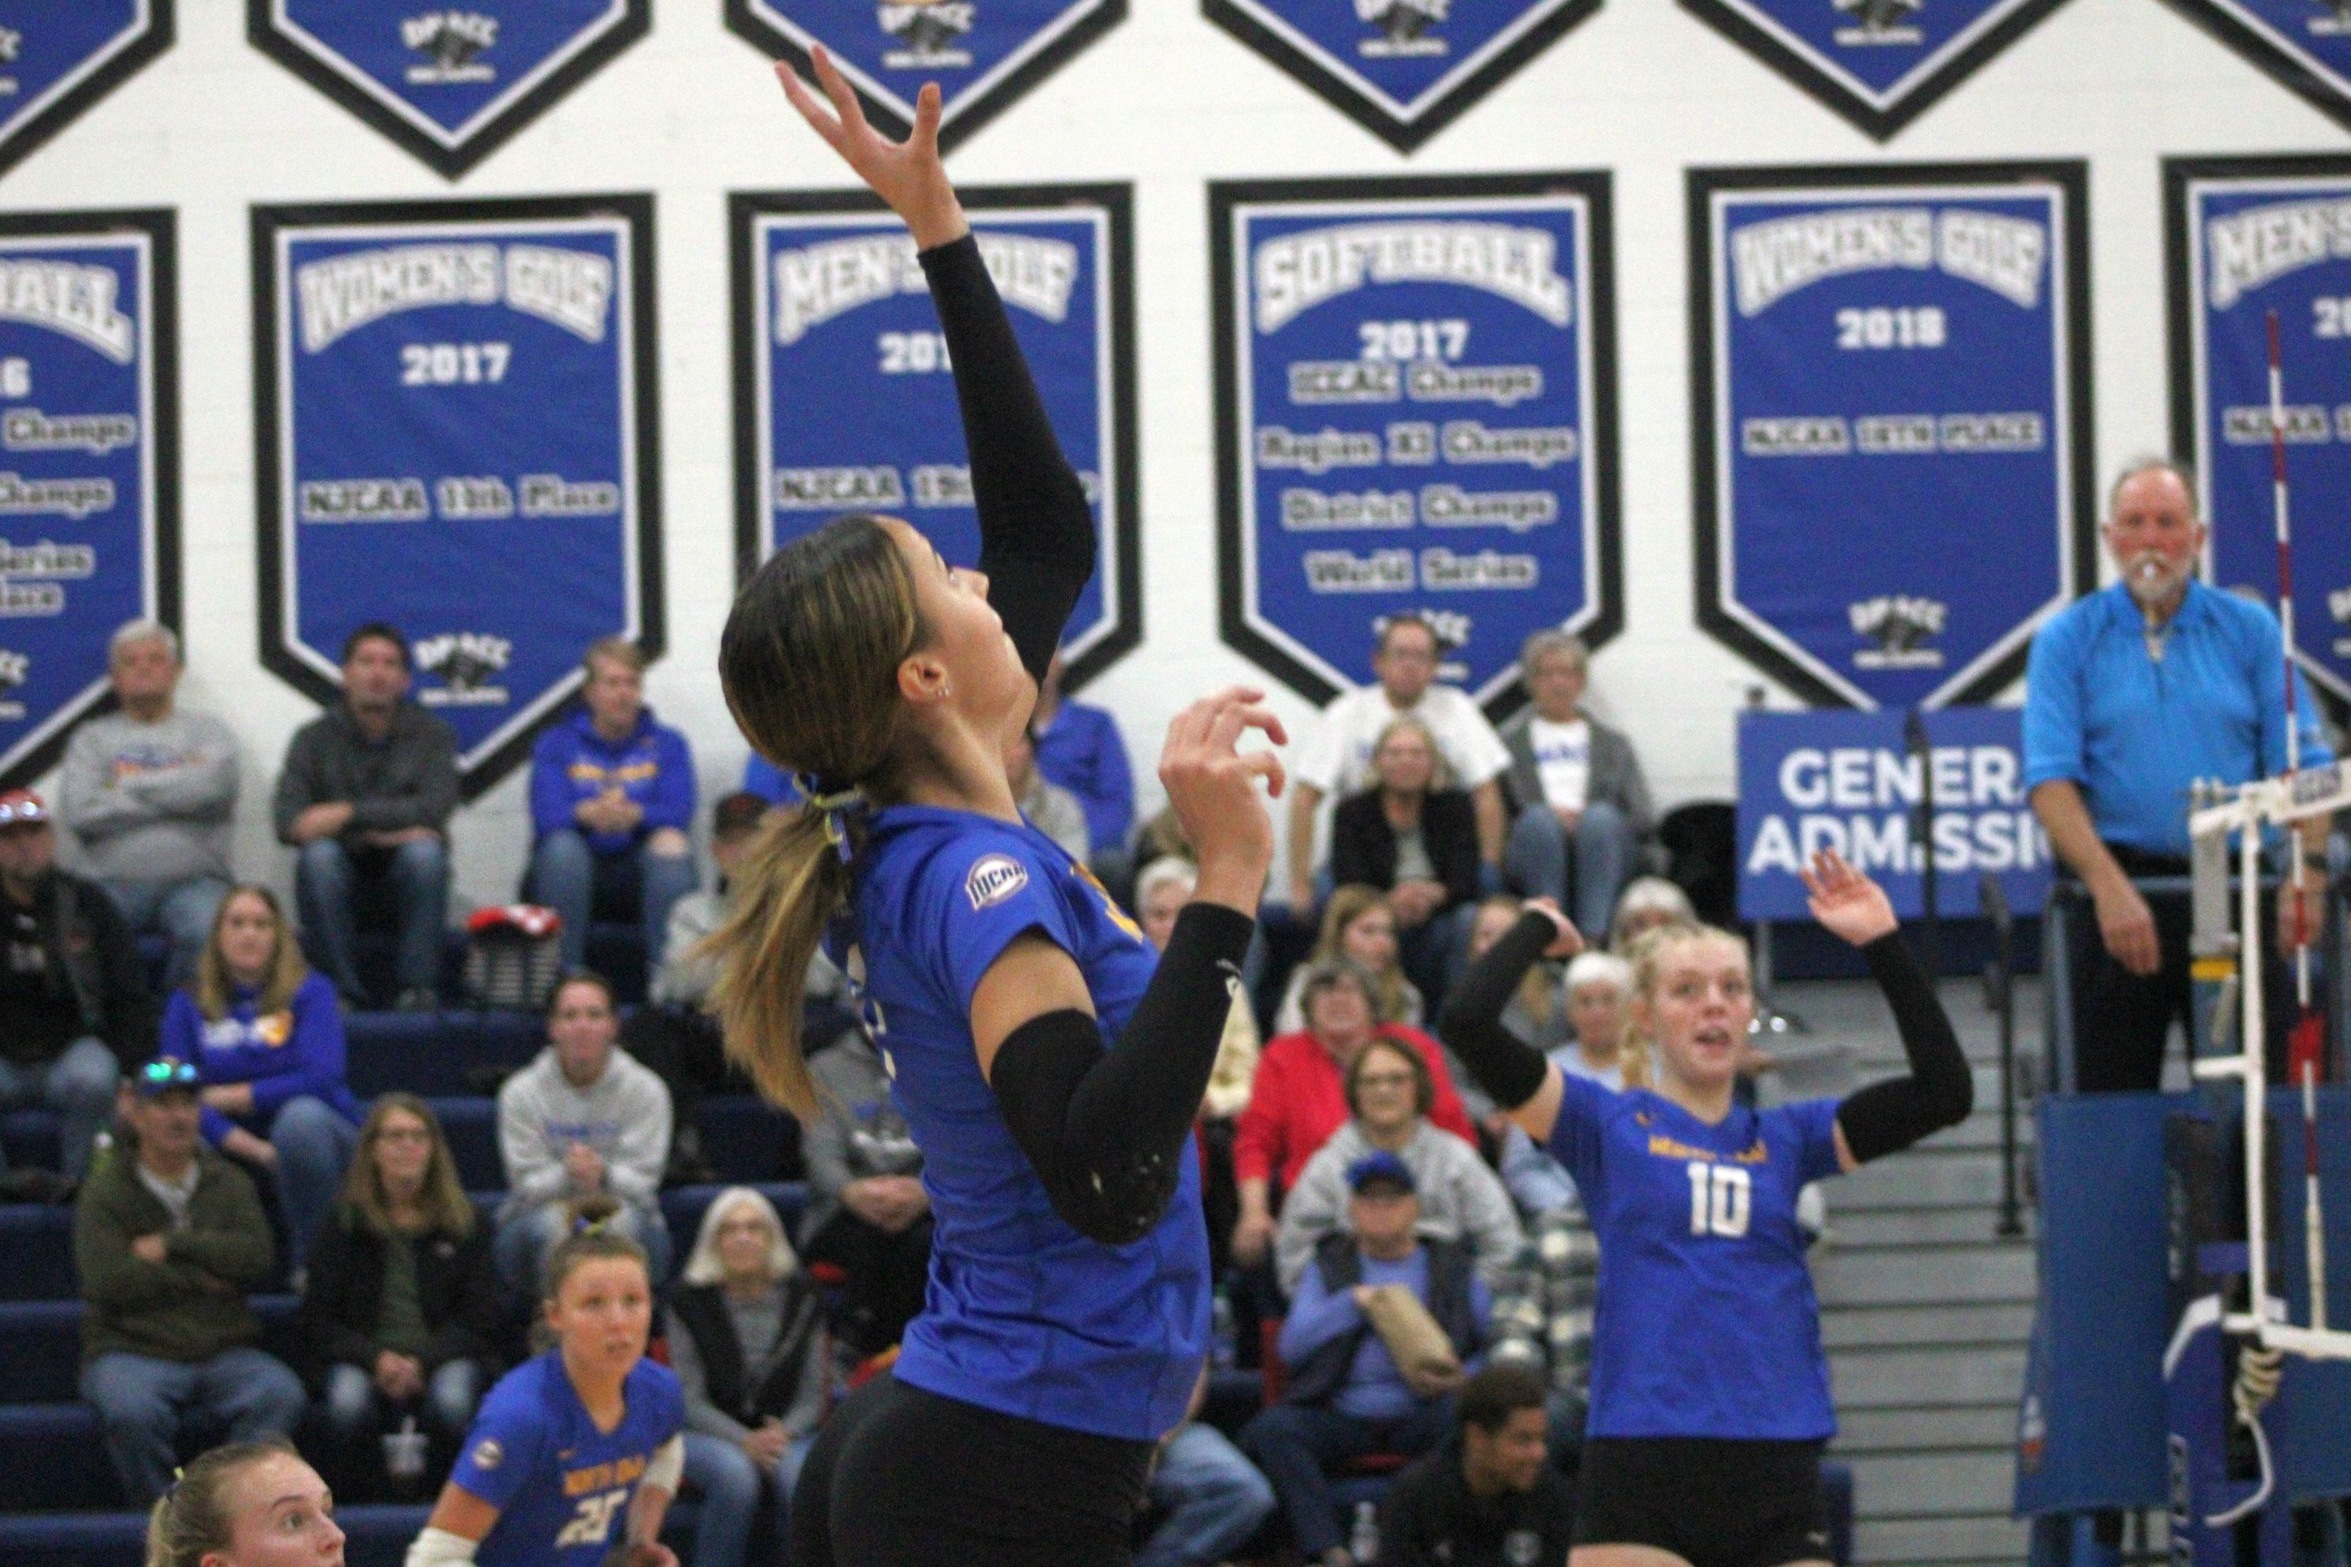 NIACC's Jaida Hansen goes up for the attack in Wednesday's regional tournament match against DMACC.